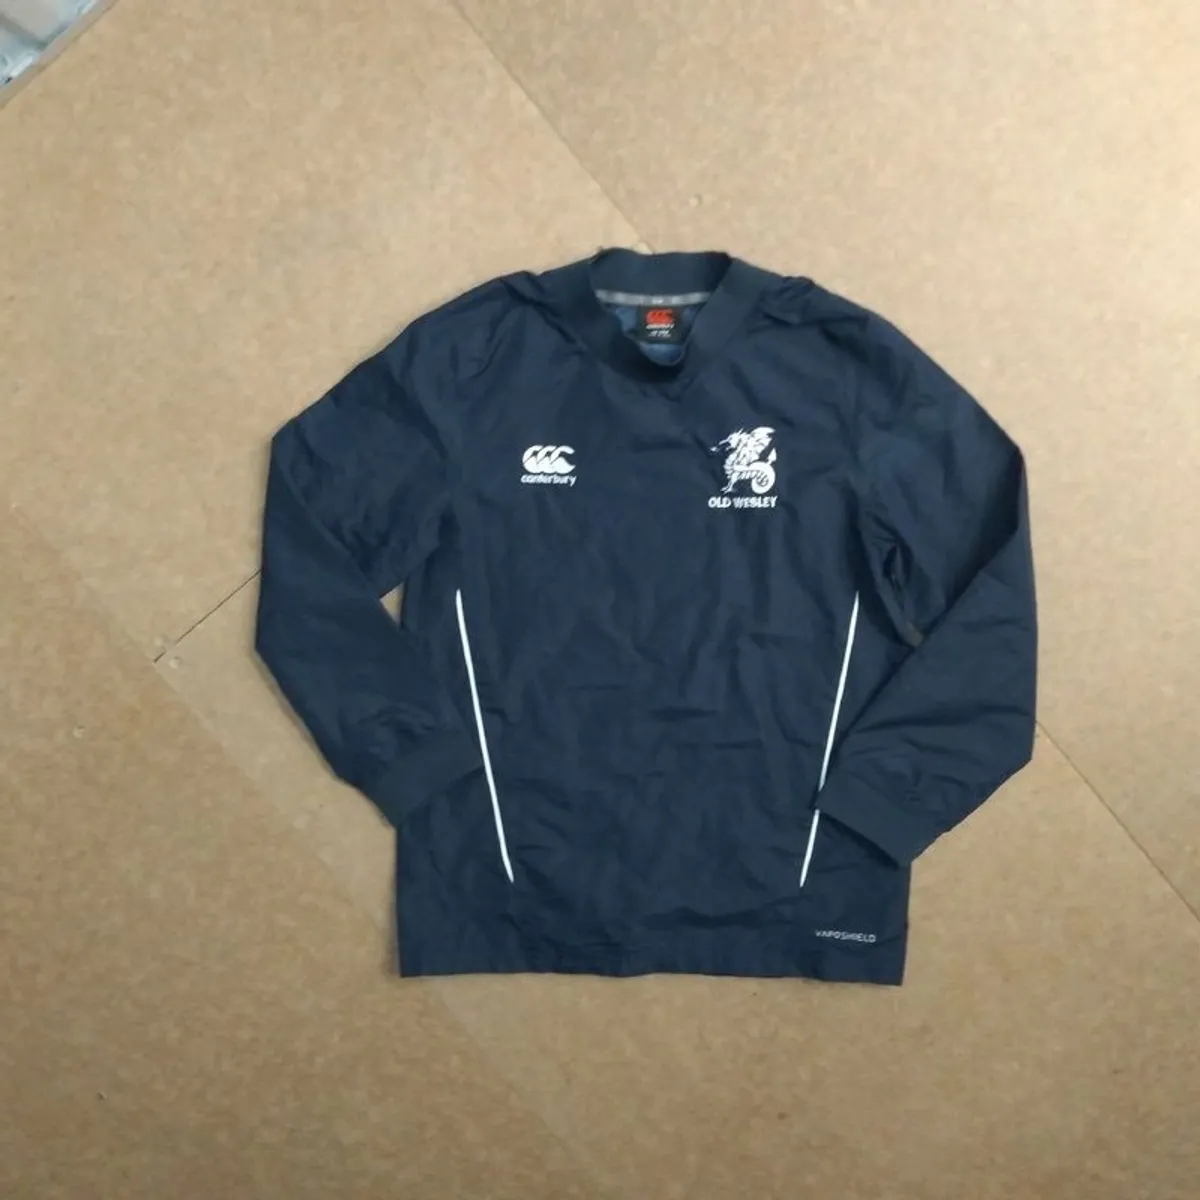 FREE POST Kids Old Wesley (12 Years) Rugby Jacket Canterbury Track Suit Top Wind Breaker Dublin Childs Youths Childrens Boys Girls